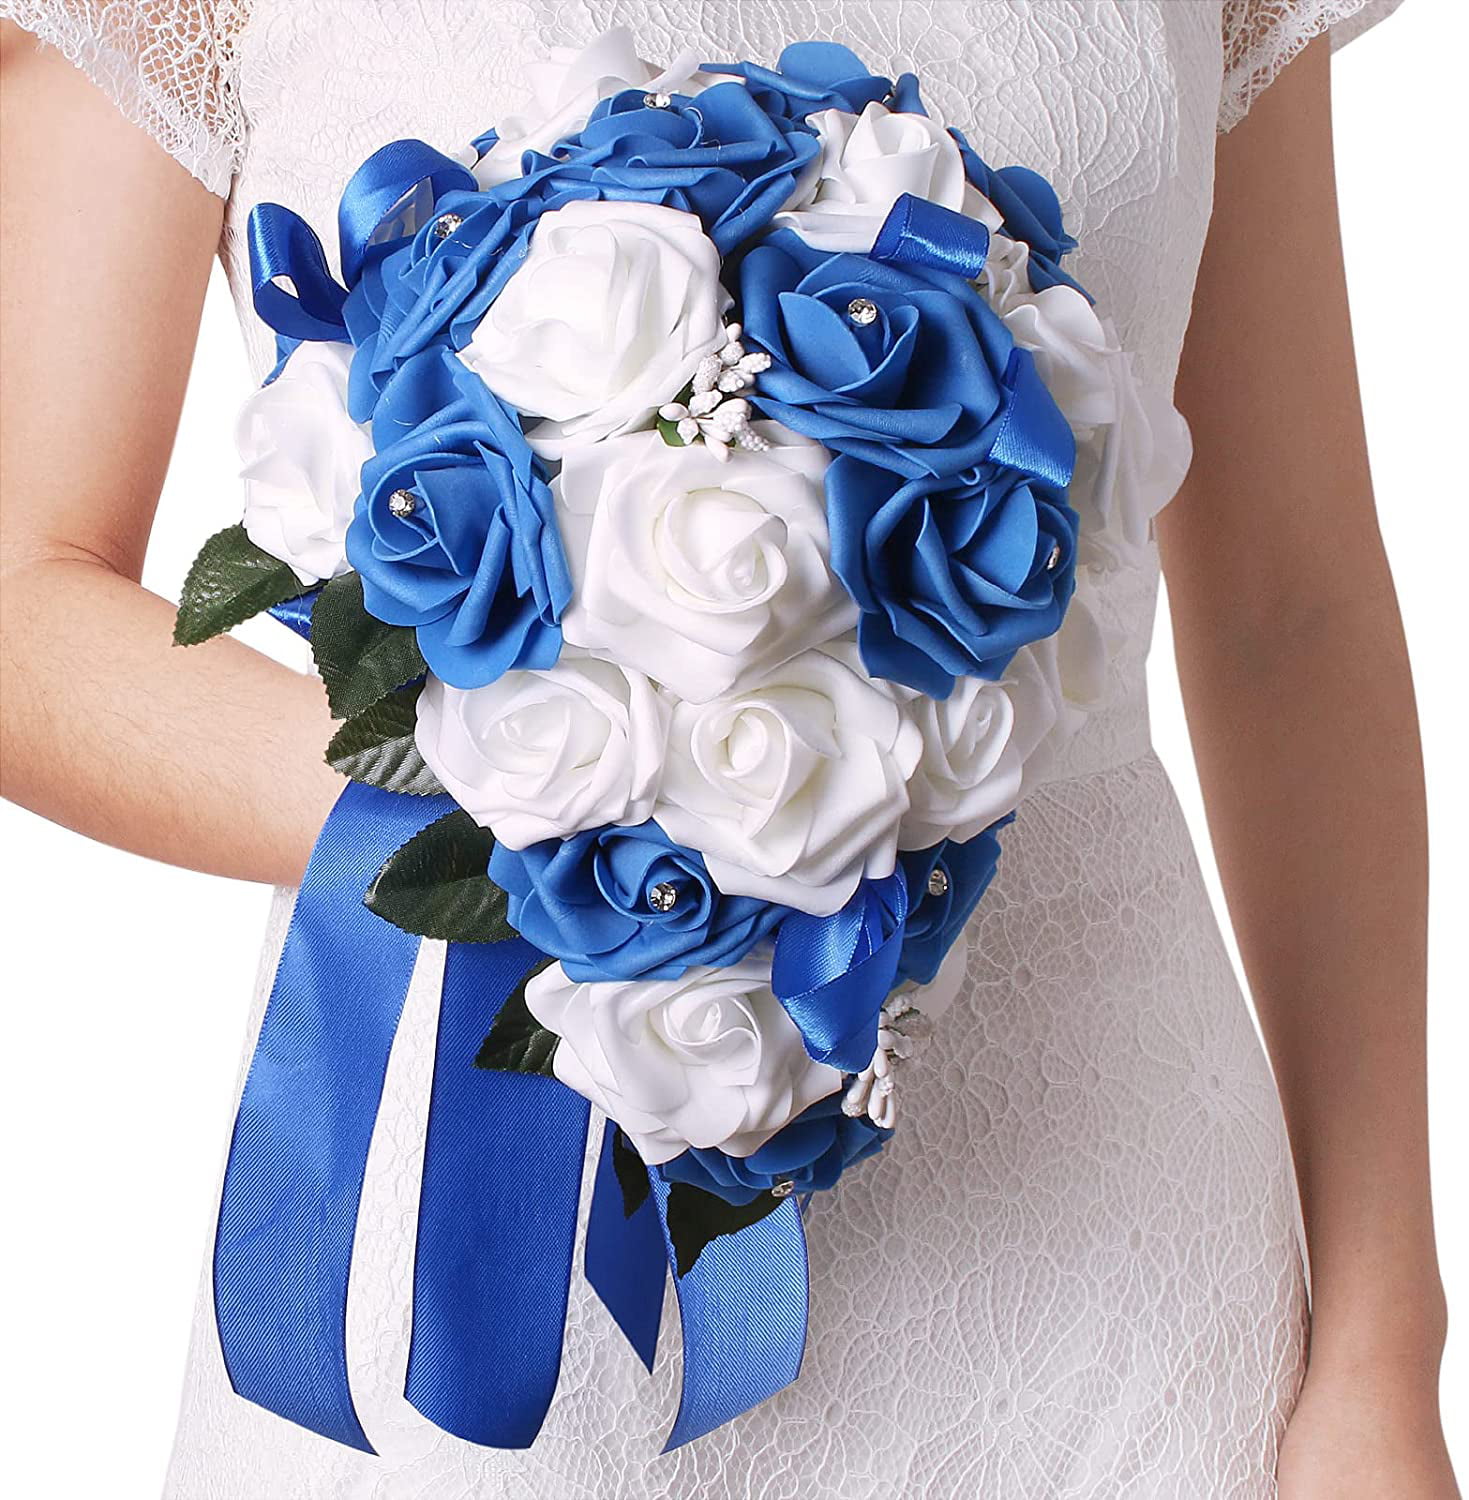 Royal Blue Silver White Rose Bridal Wedding Bouquet Accessories 